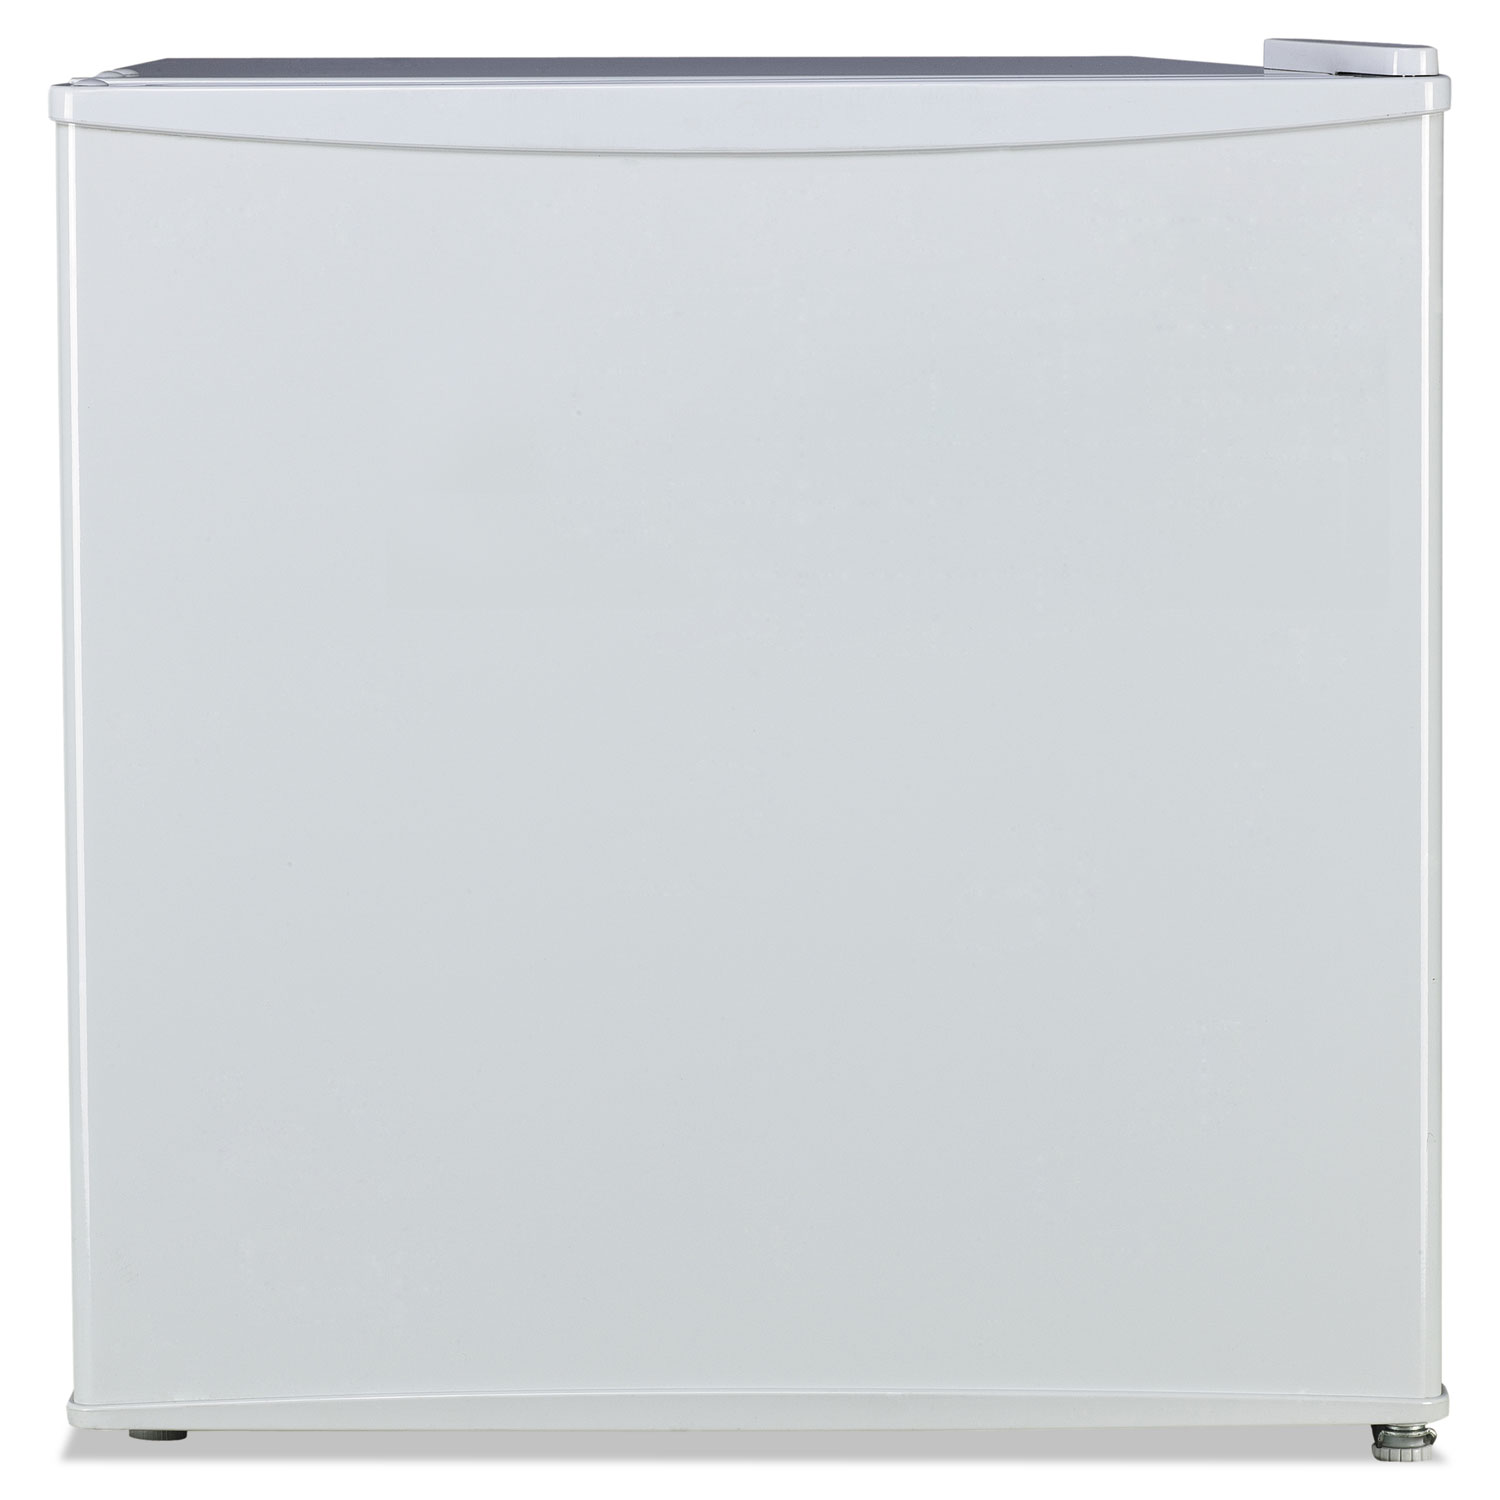 1.6 Cu. Ft. Refrigerator with Chiller Compartment, White